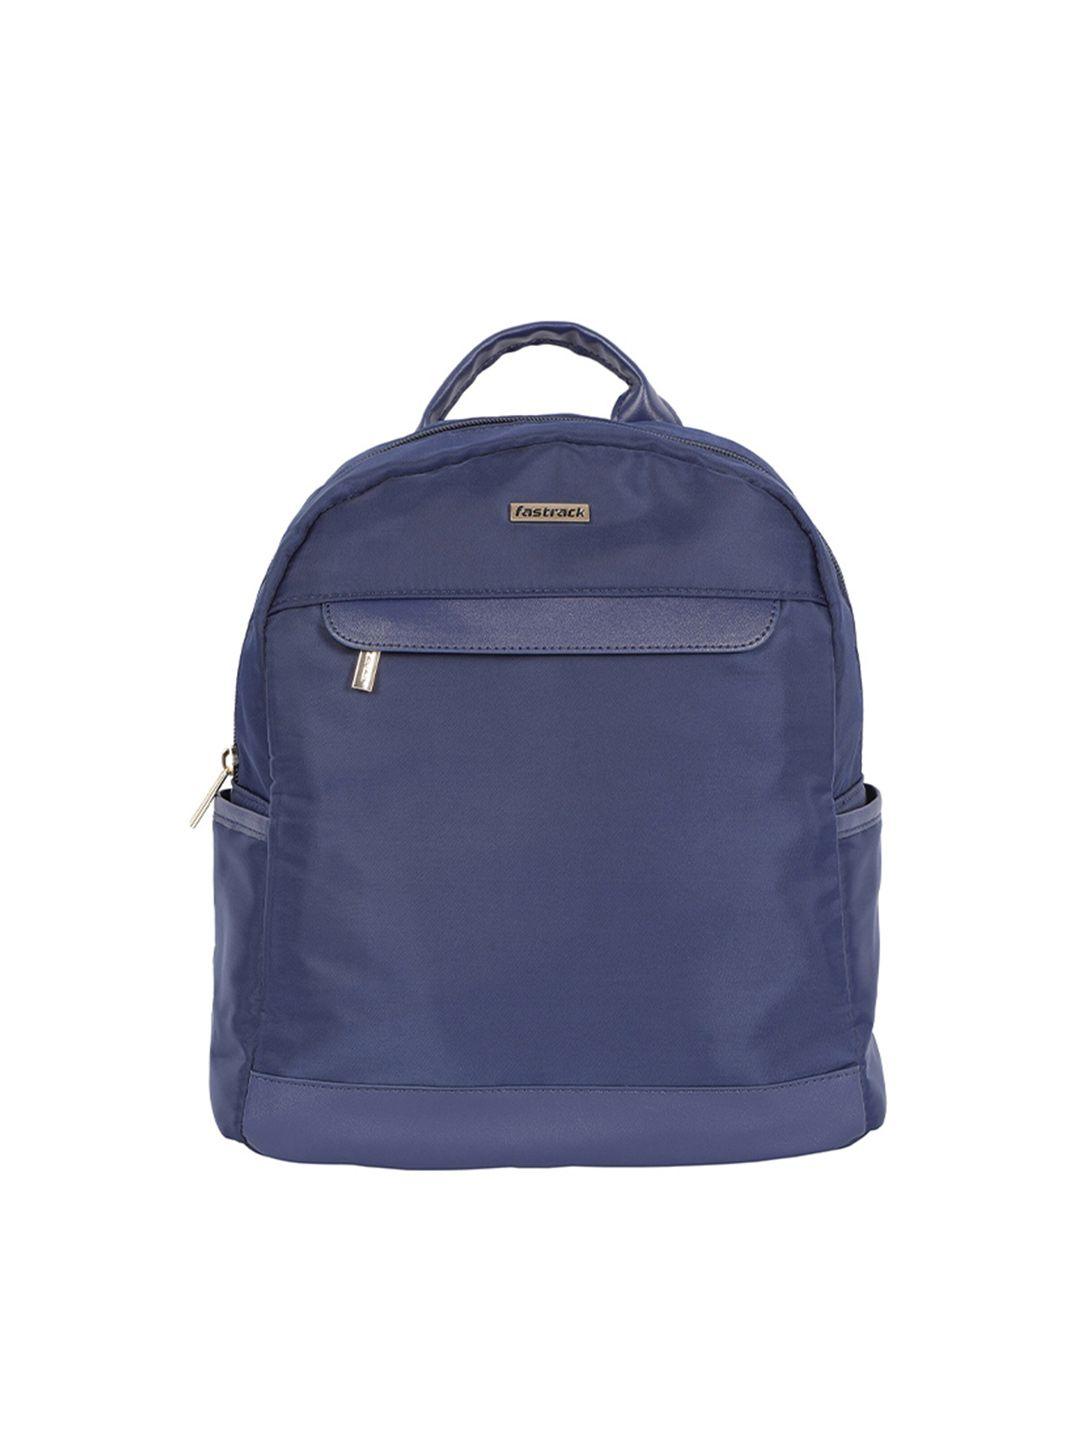 fastrack women navy blue solid backpack